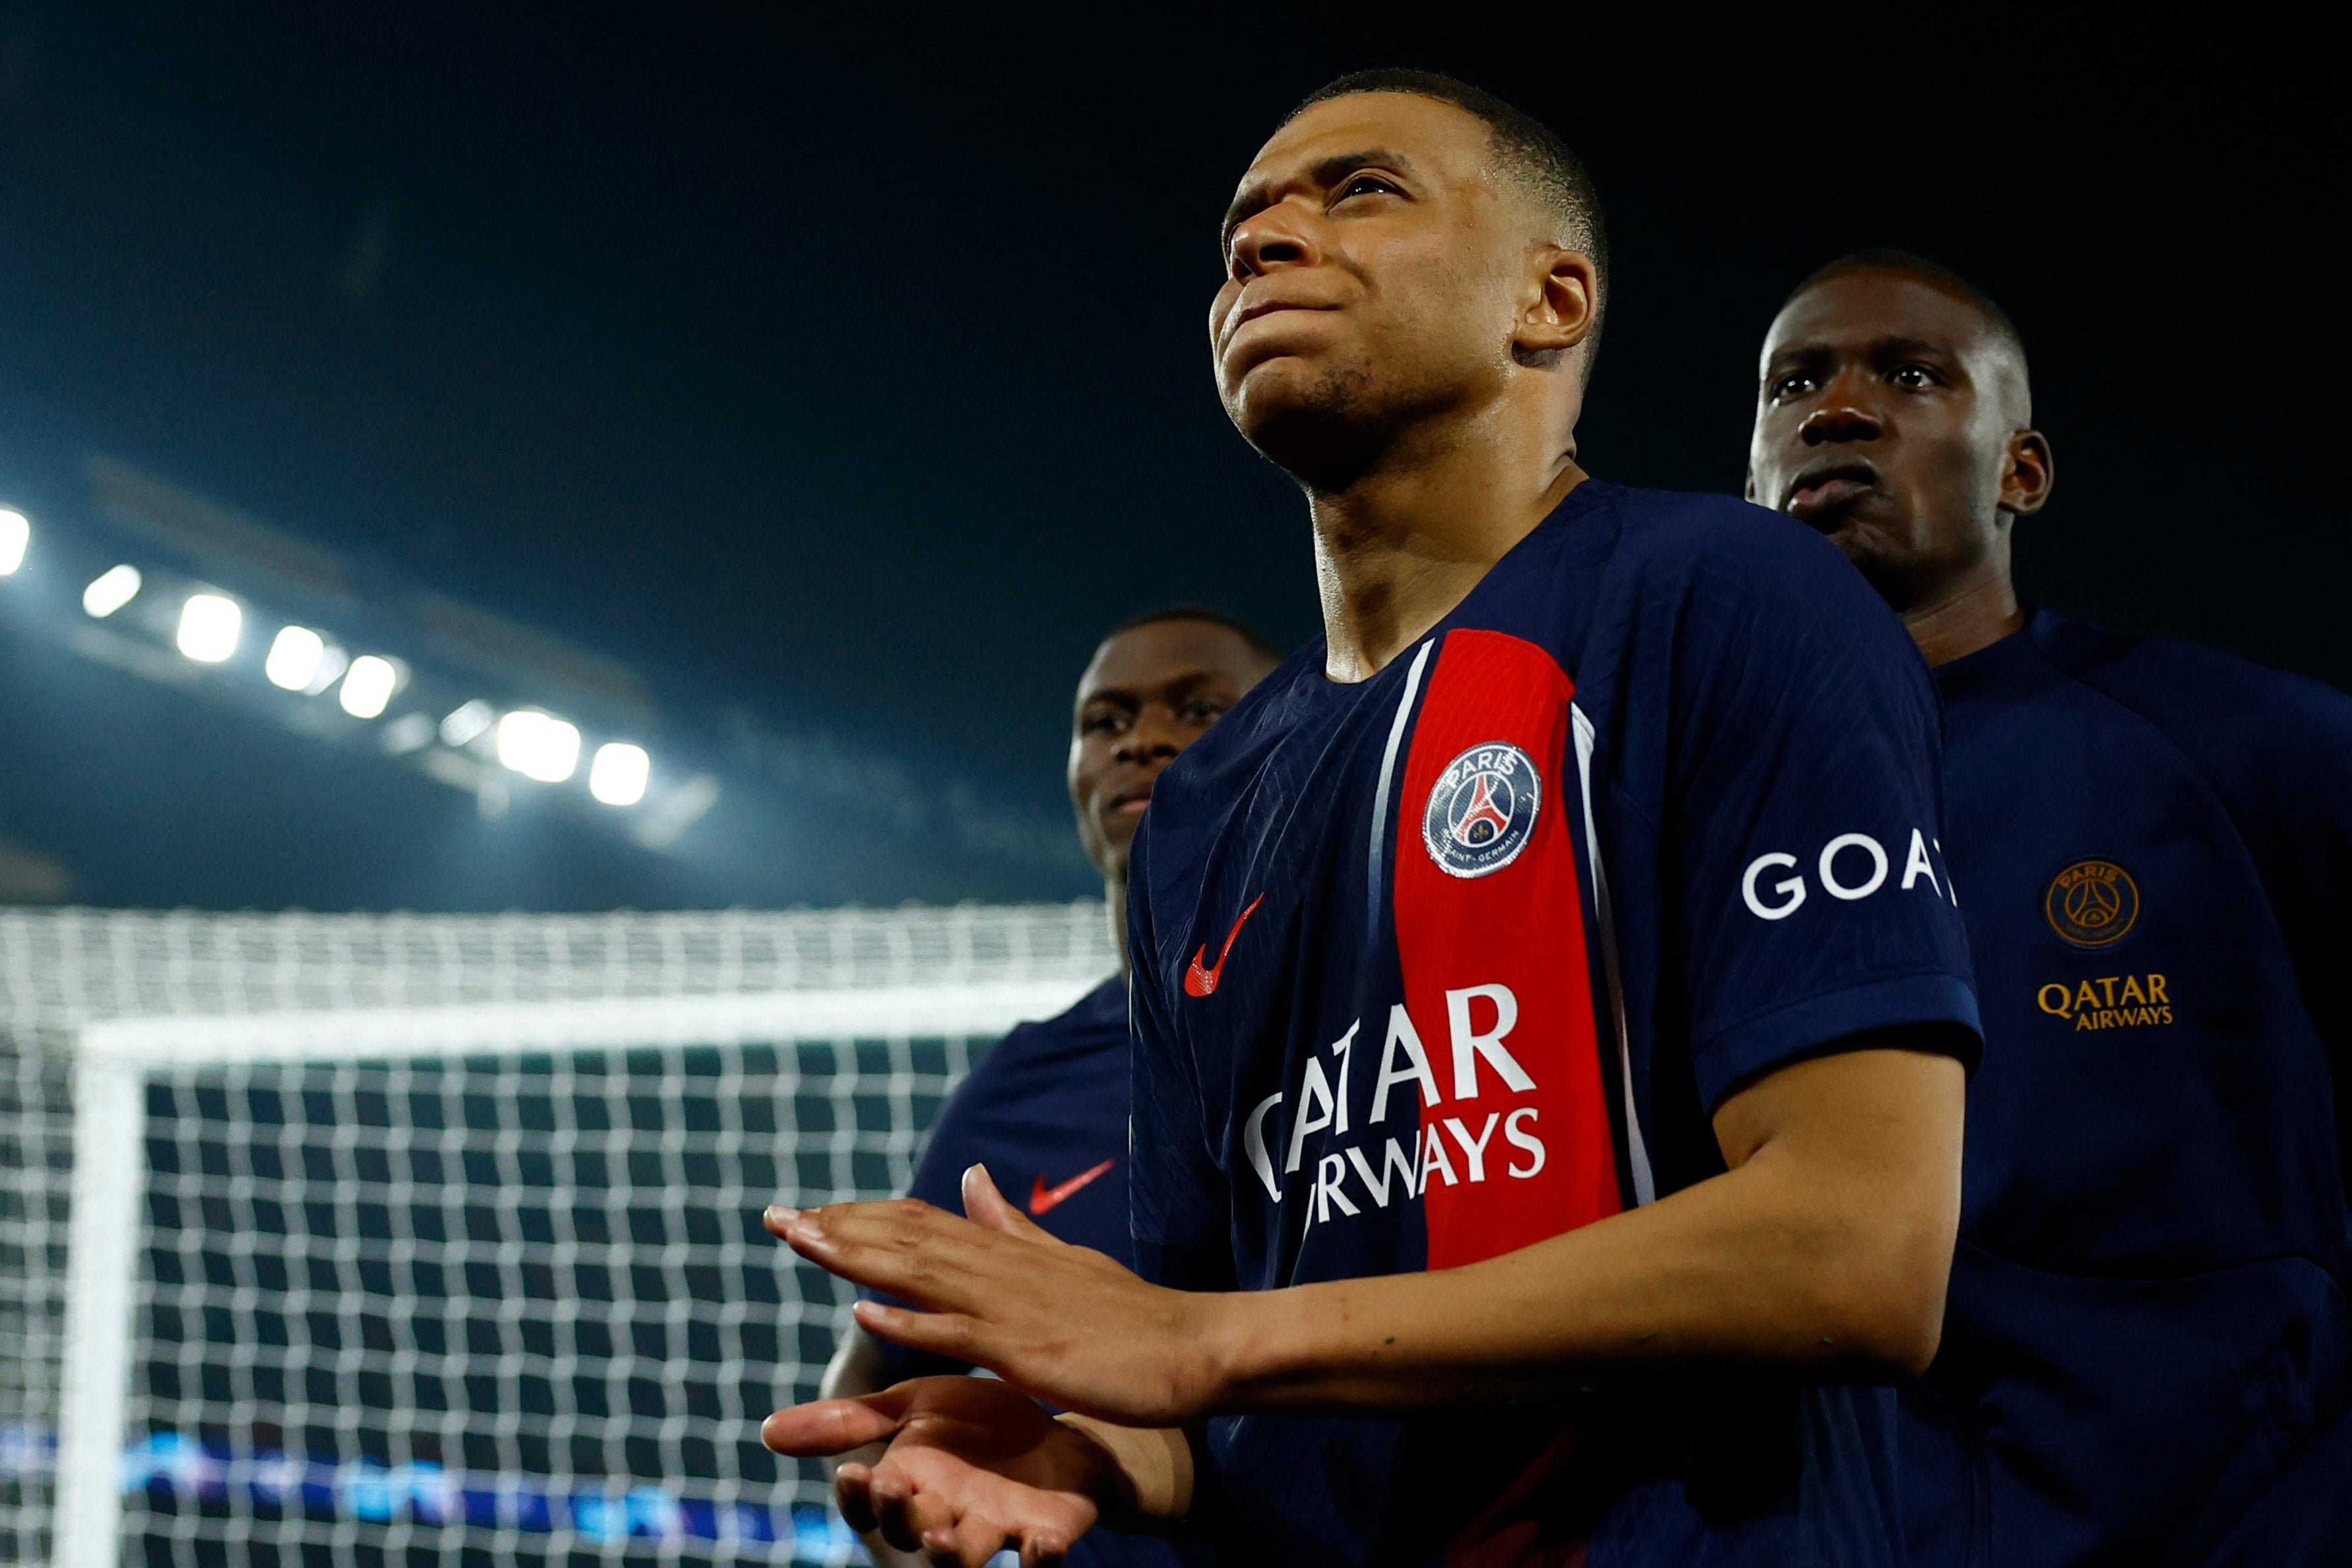 Kylian Mbappe’s time at PSG is coming to an end